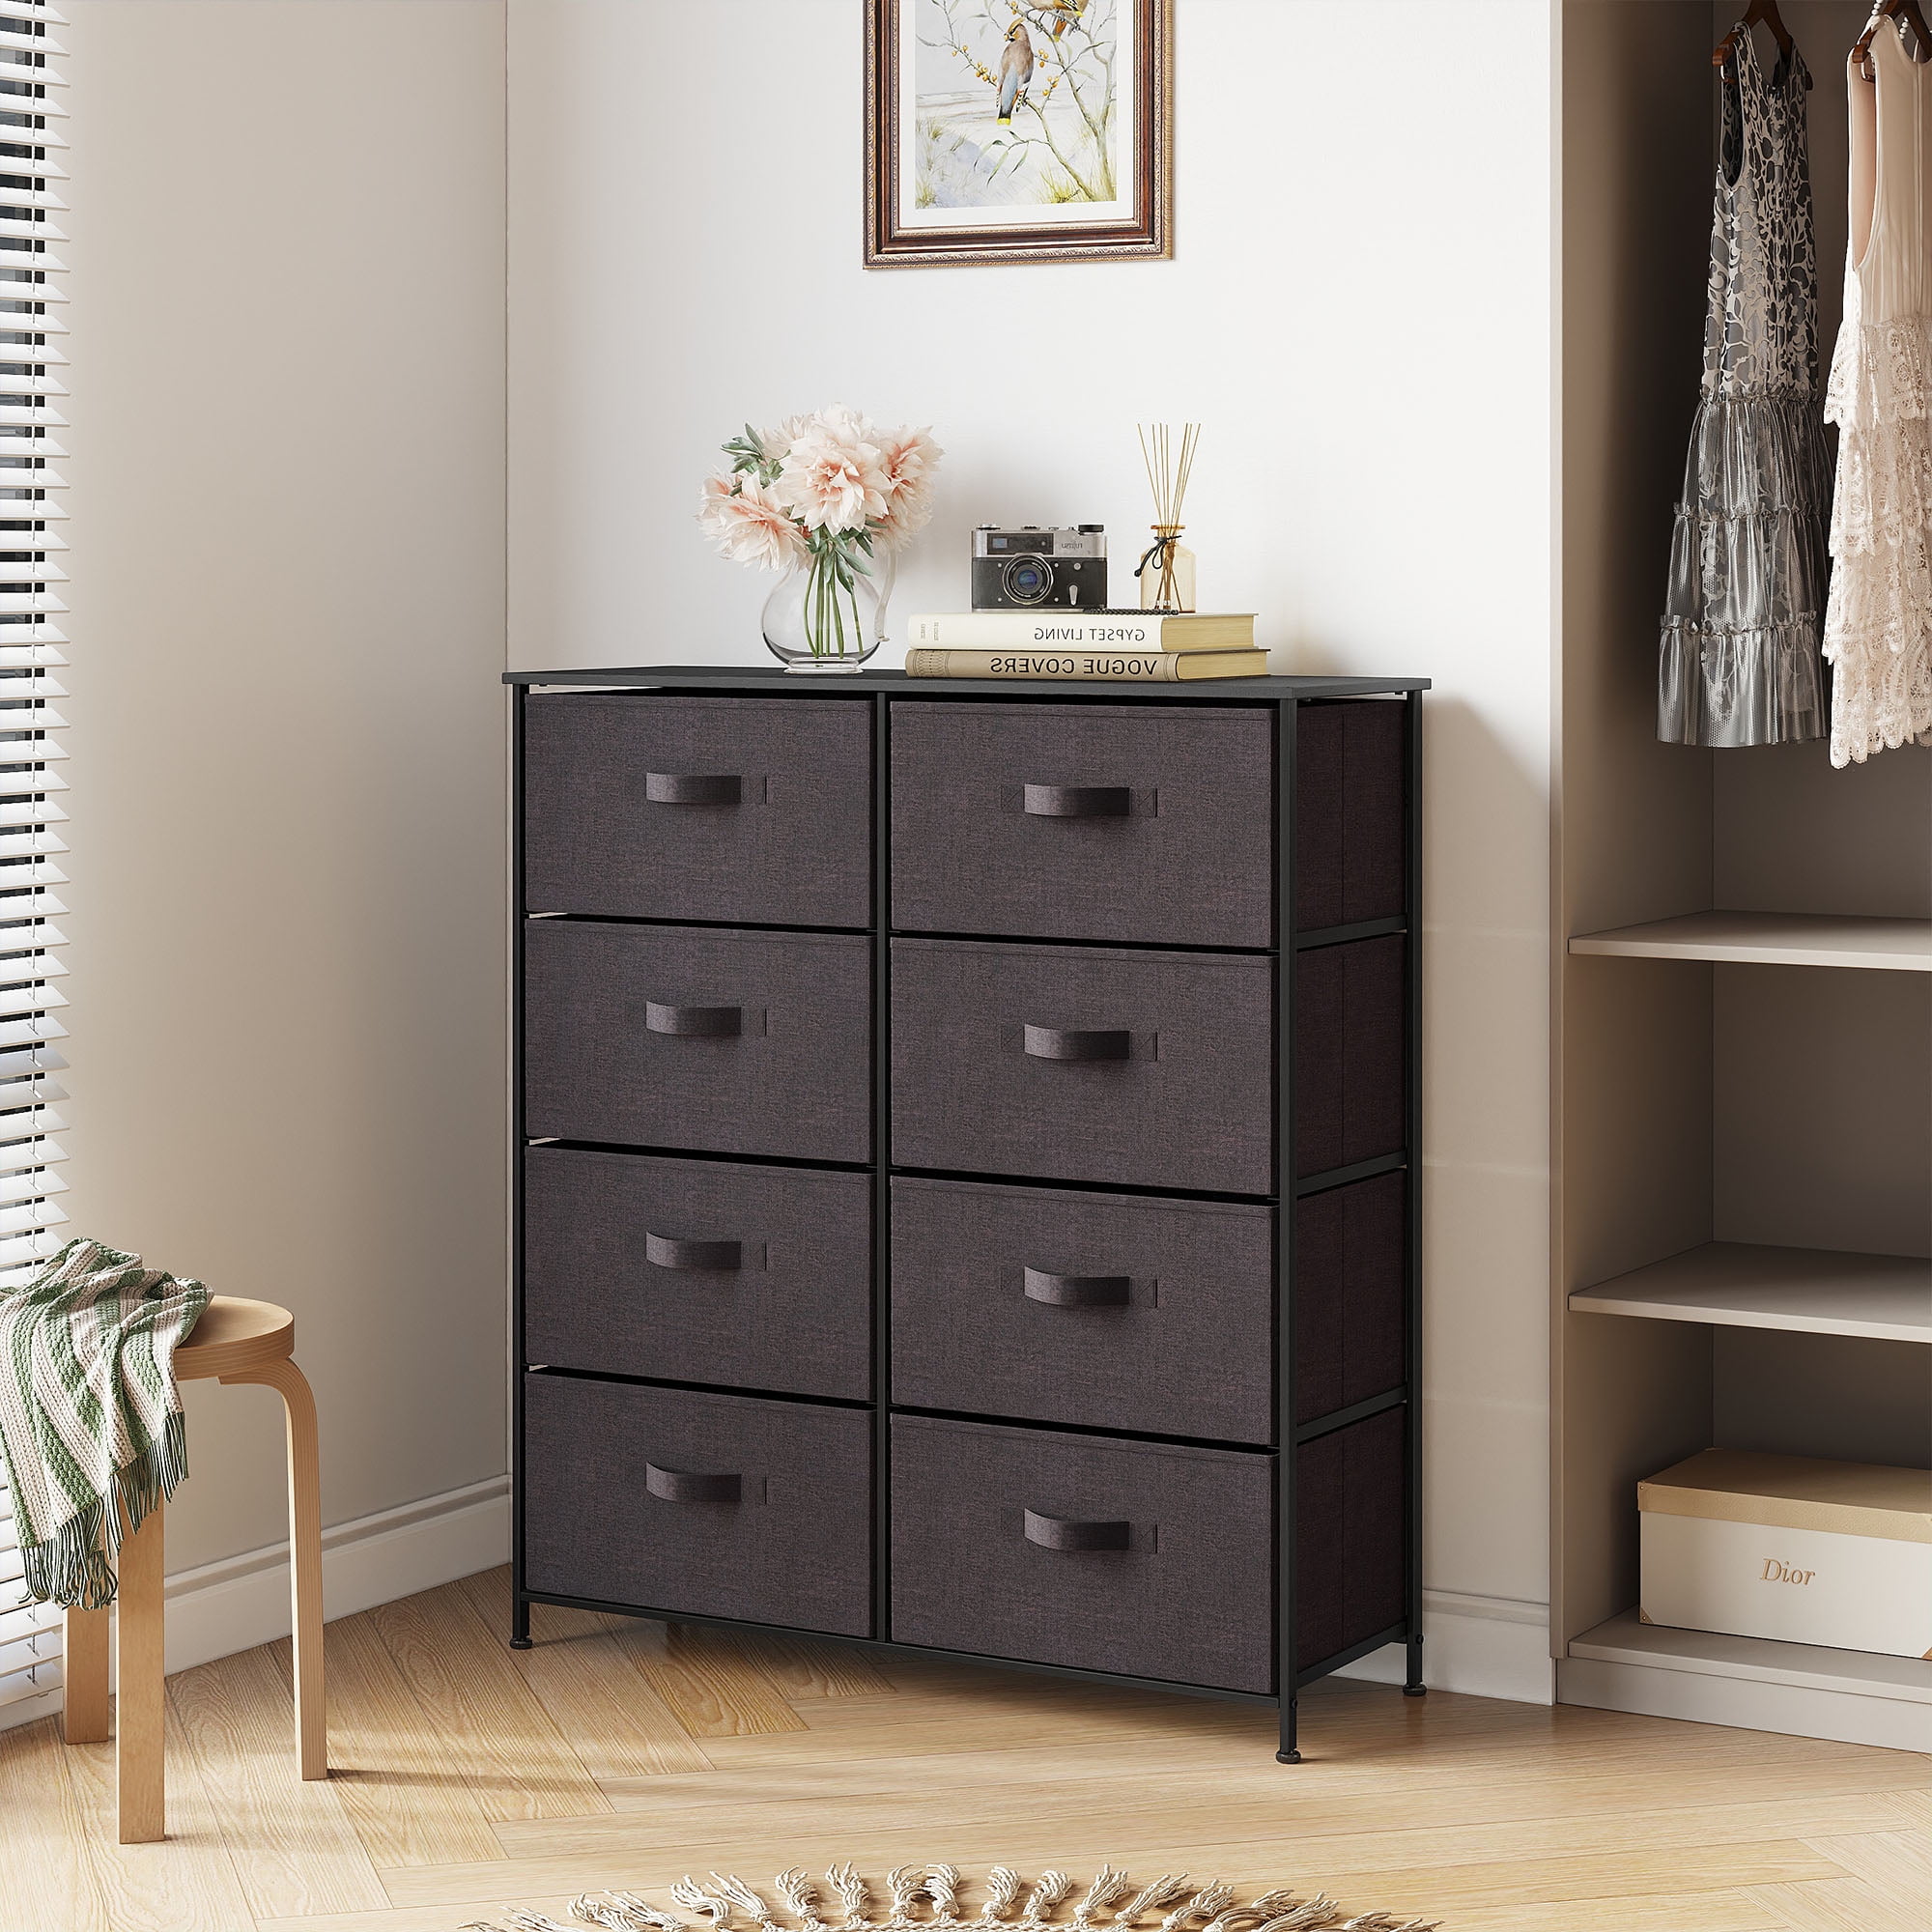 Dwvo 8 Drawers Tall Dresser For Bedroom, Tall Dresser With Shelves